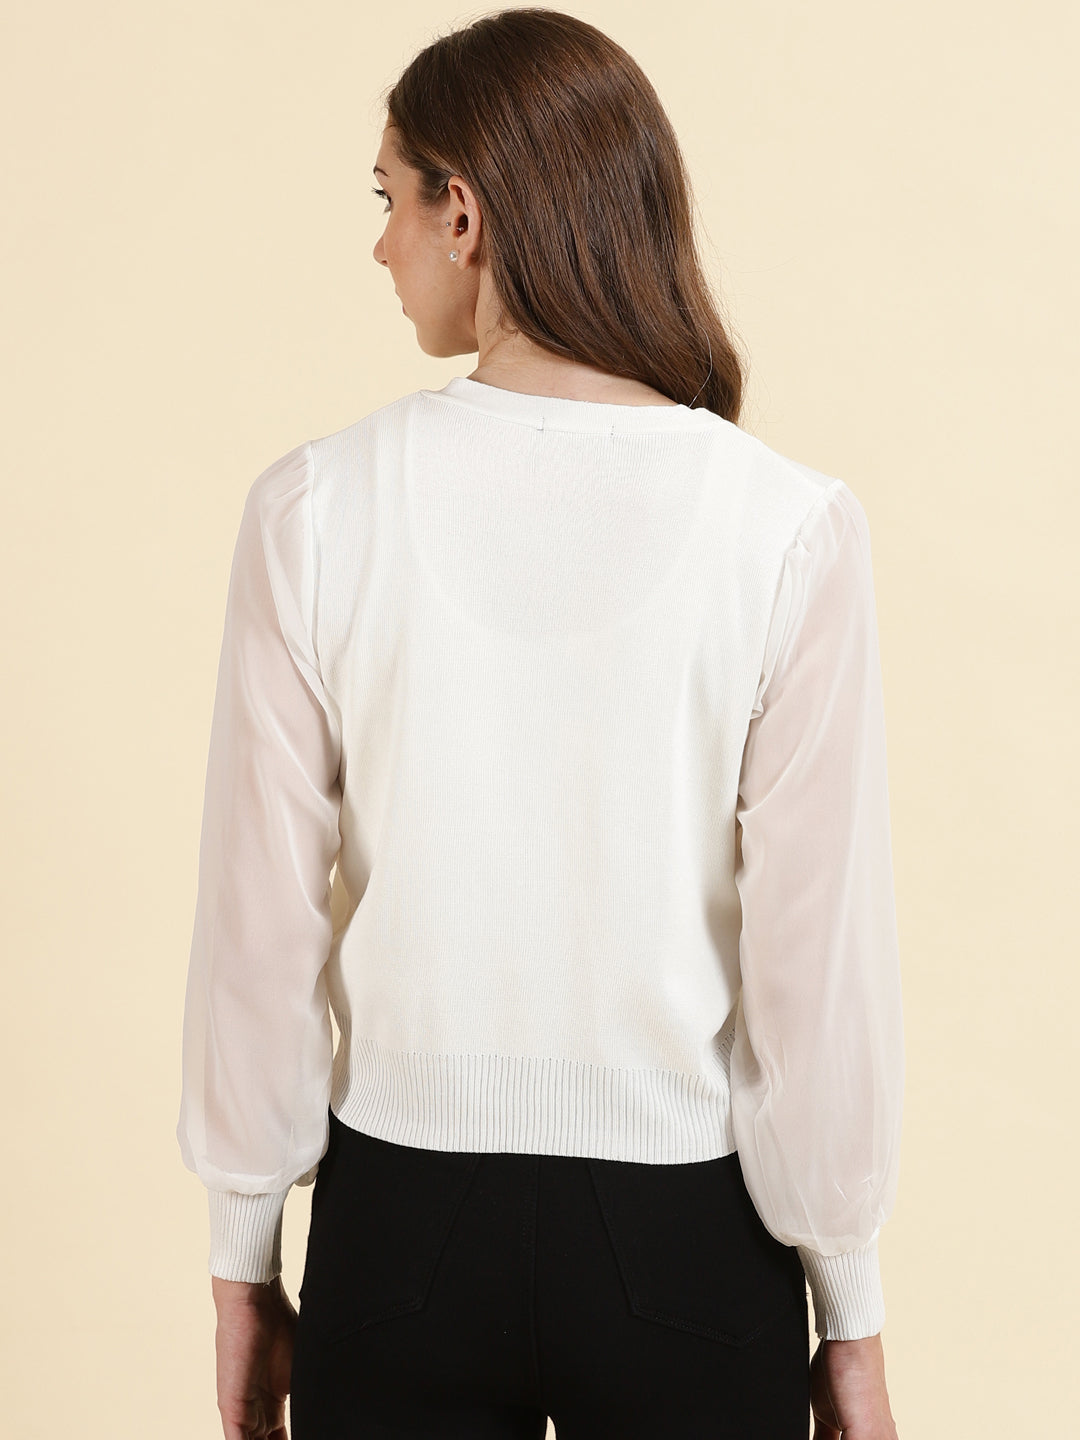 Women's White Solid Top